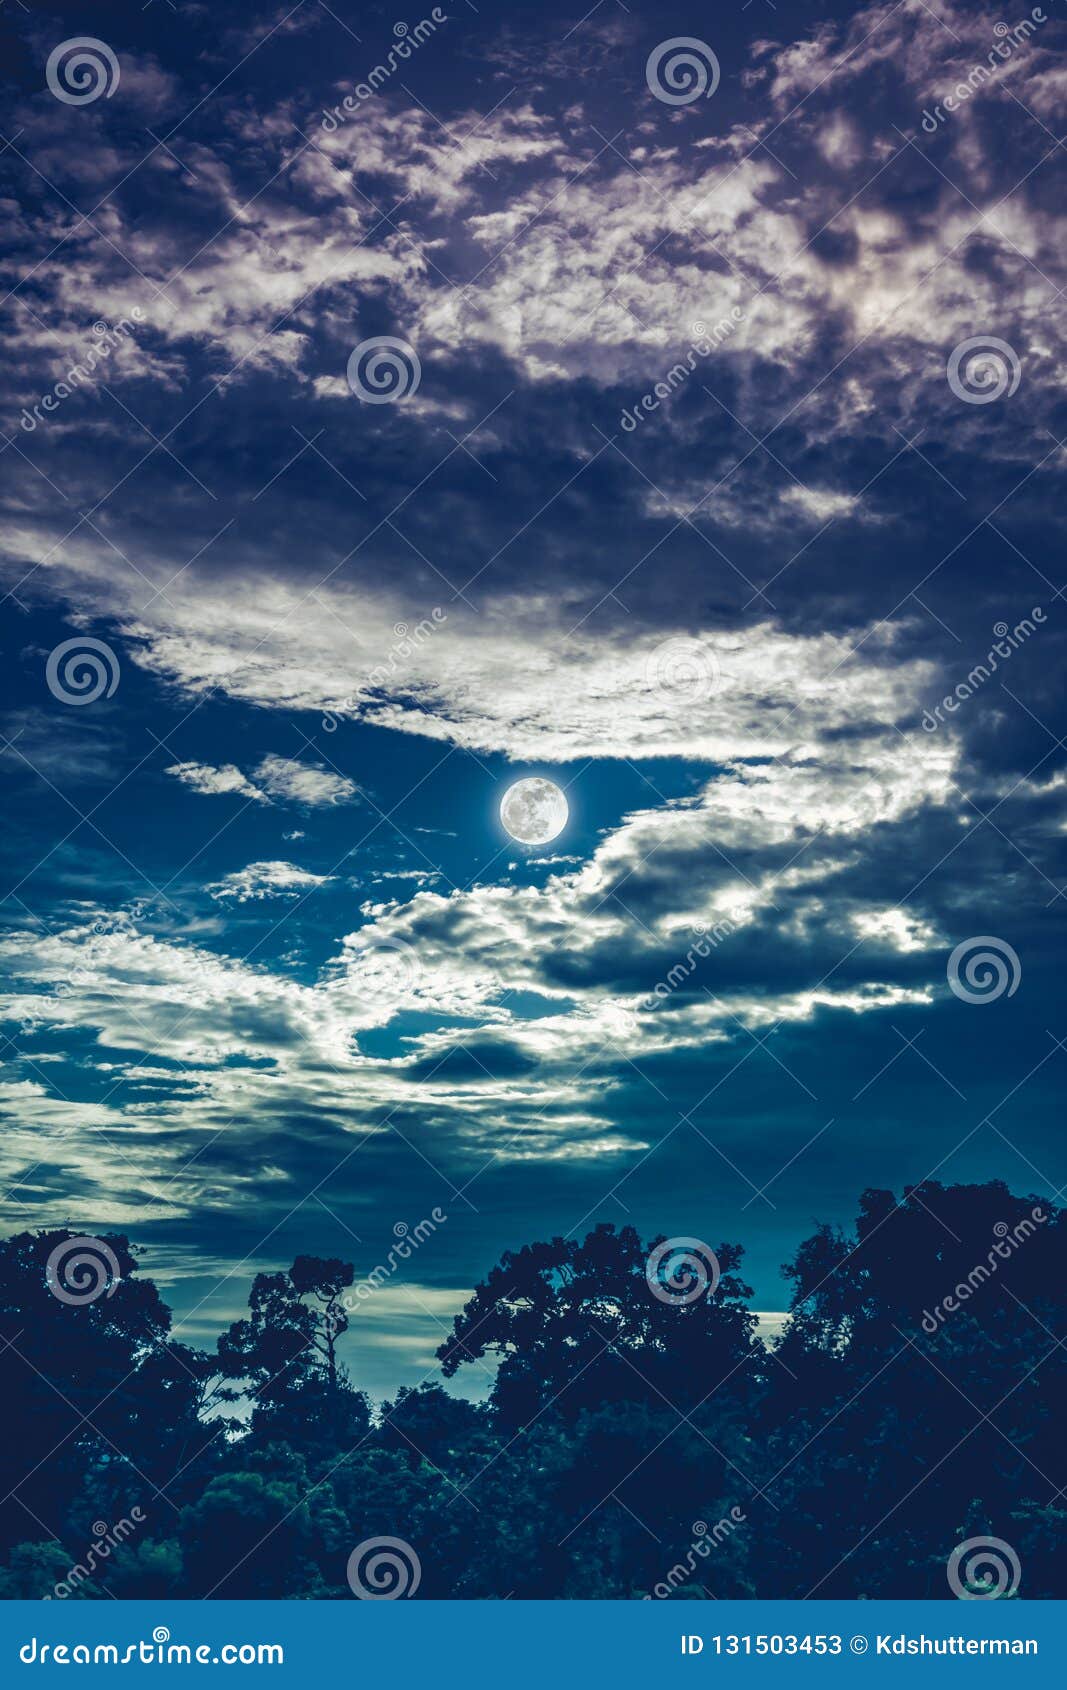 night landscape of sky with dark cloudy and full moon above silhouettes of trees in forest. serenity nature background in gloaming